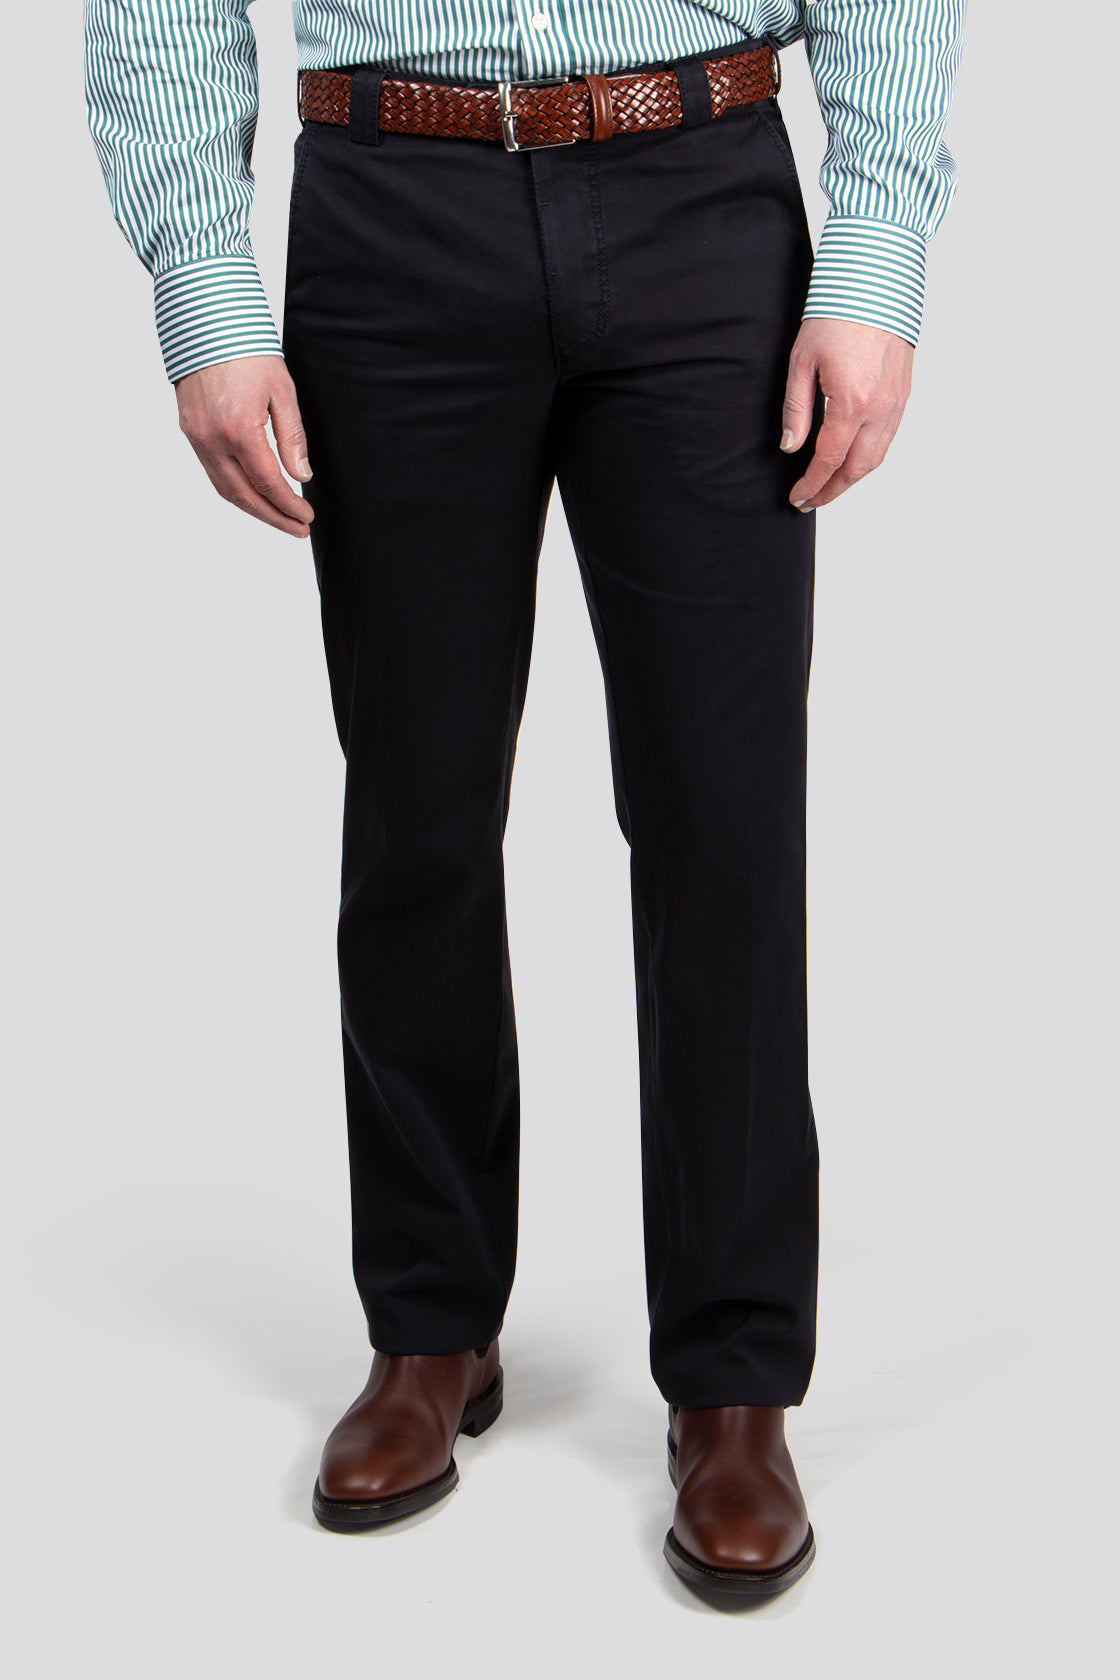 Meyer Trousers and Jeans  Meyer Mens Trousers  Meyer Expandable Waist  Trousers  Stephen Allen Menswear